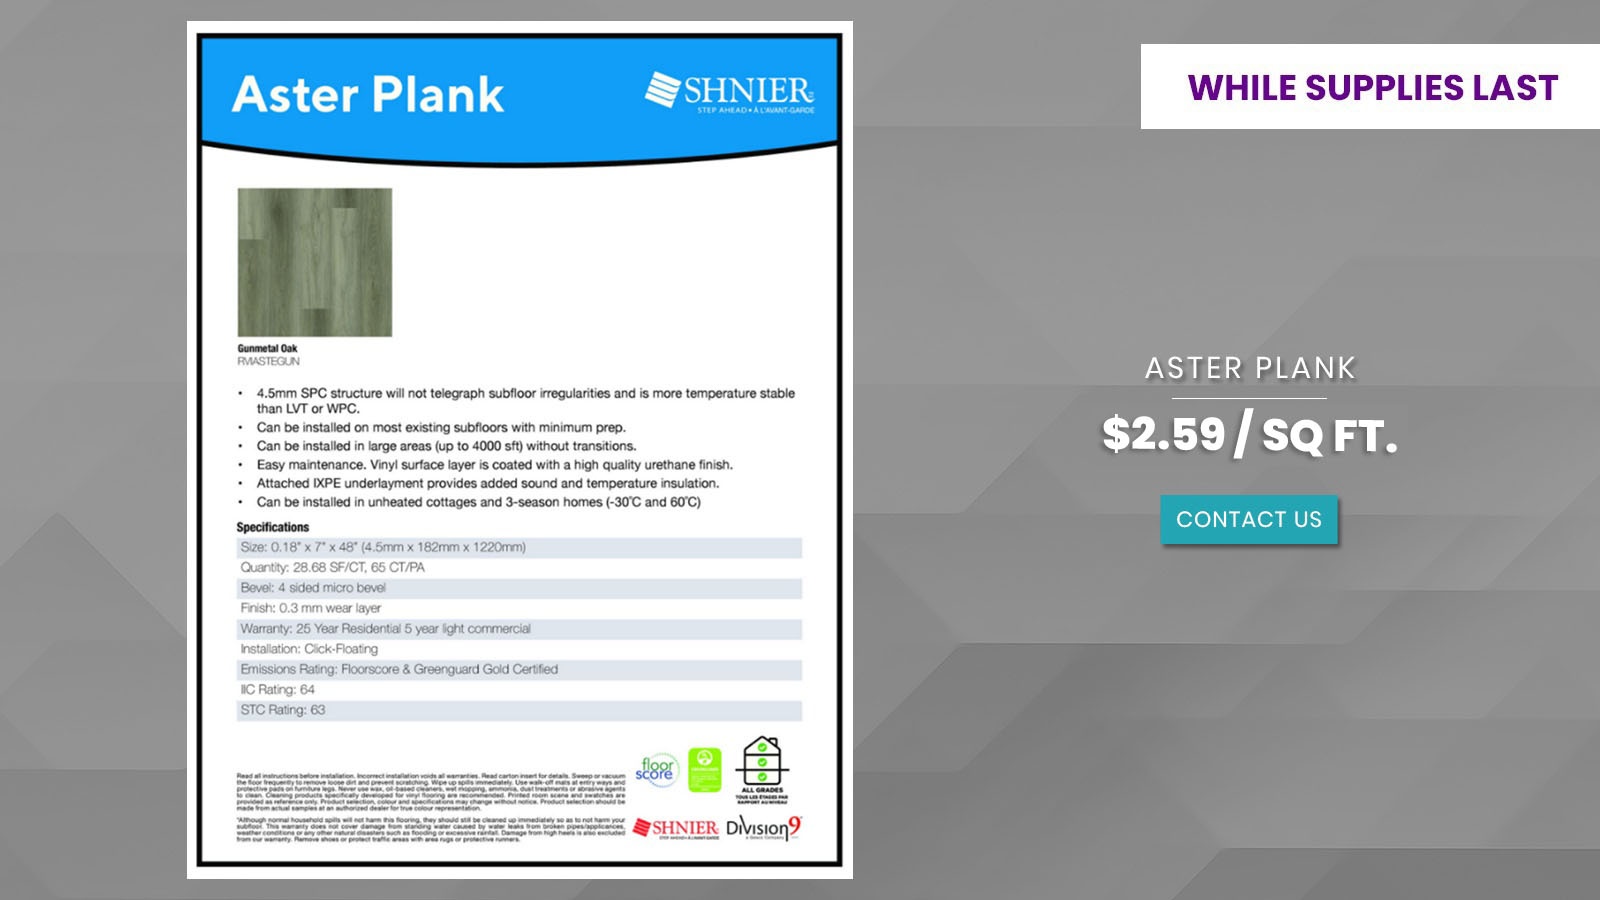 Aster Plank